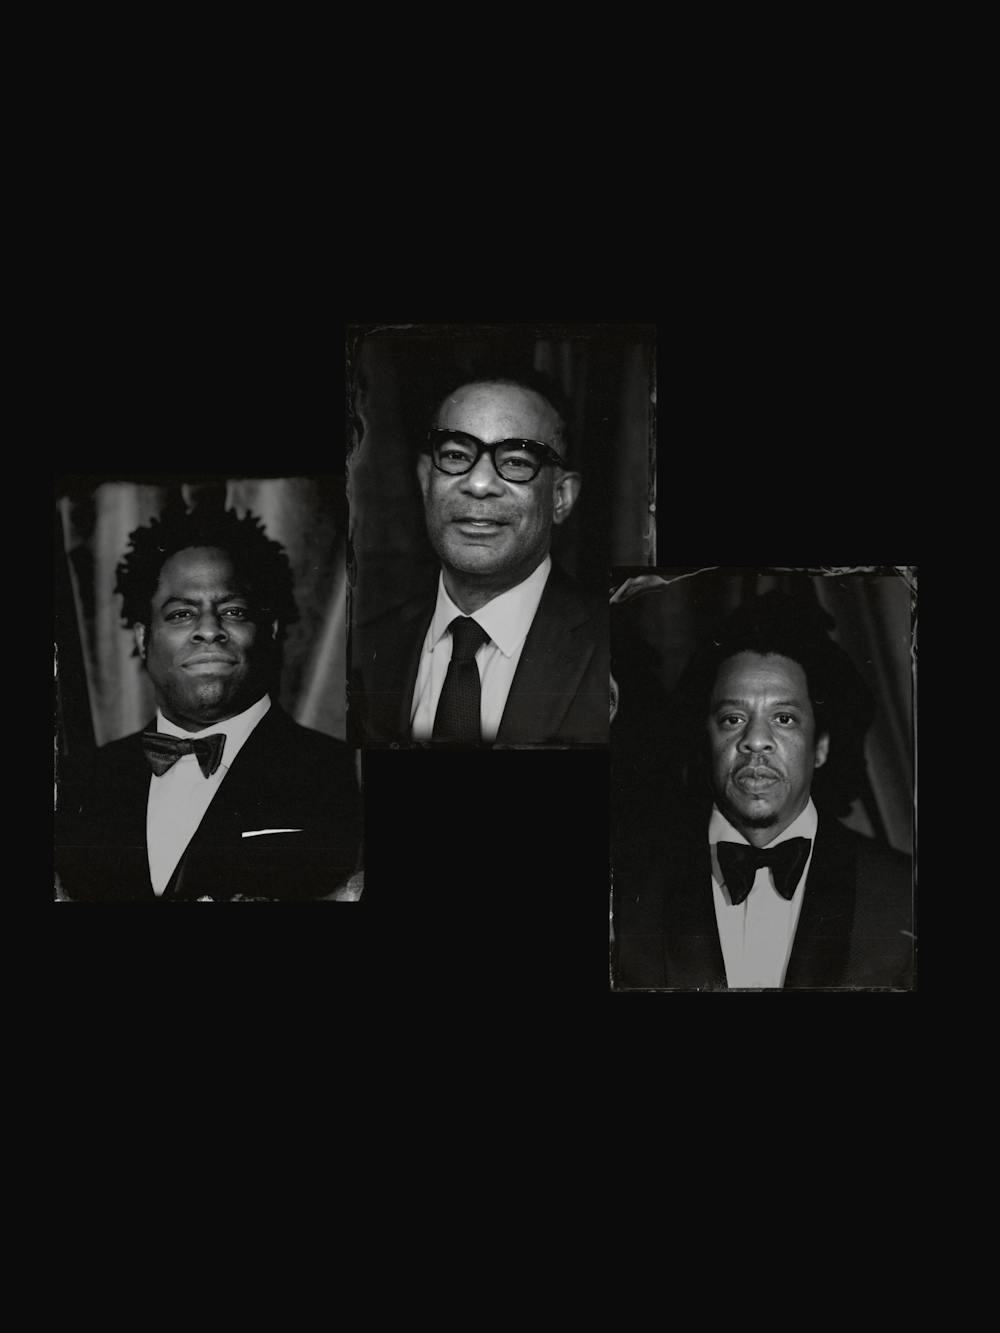 Jeymes Samuel, James Lassiter, and Shawn Carter in this triptych black and white arrangement. They each wear suits. 